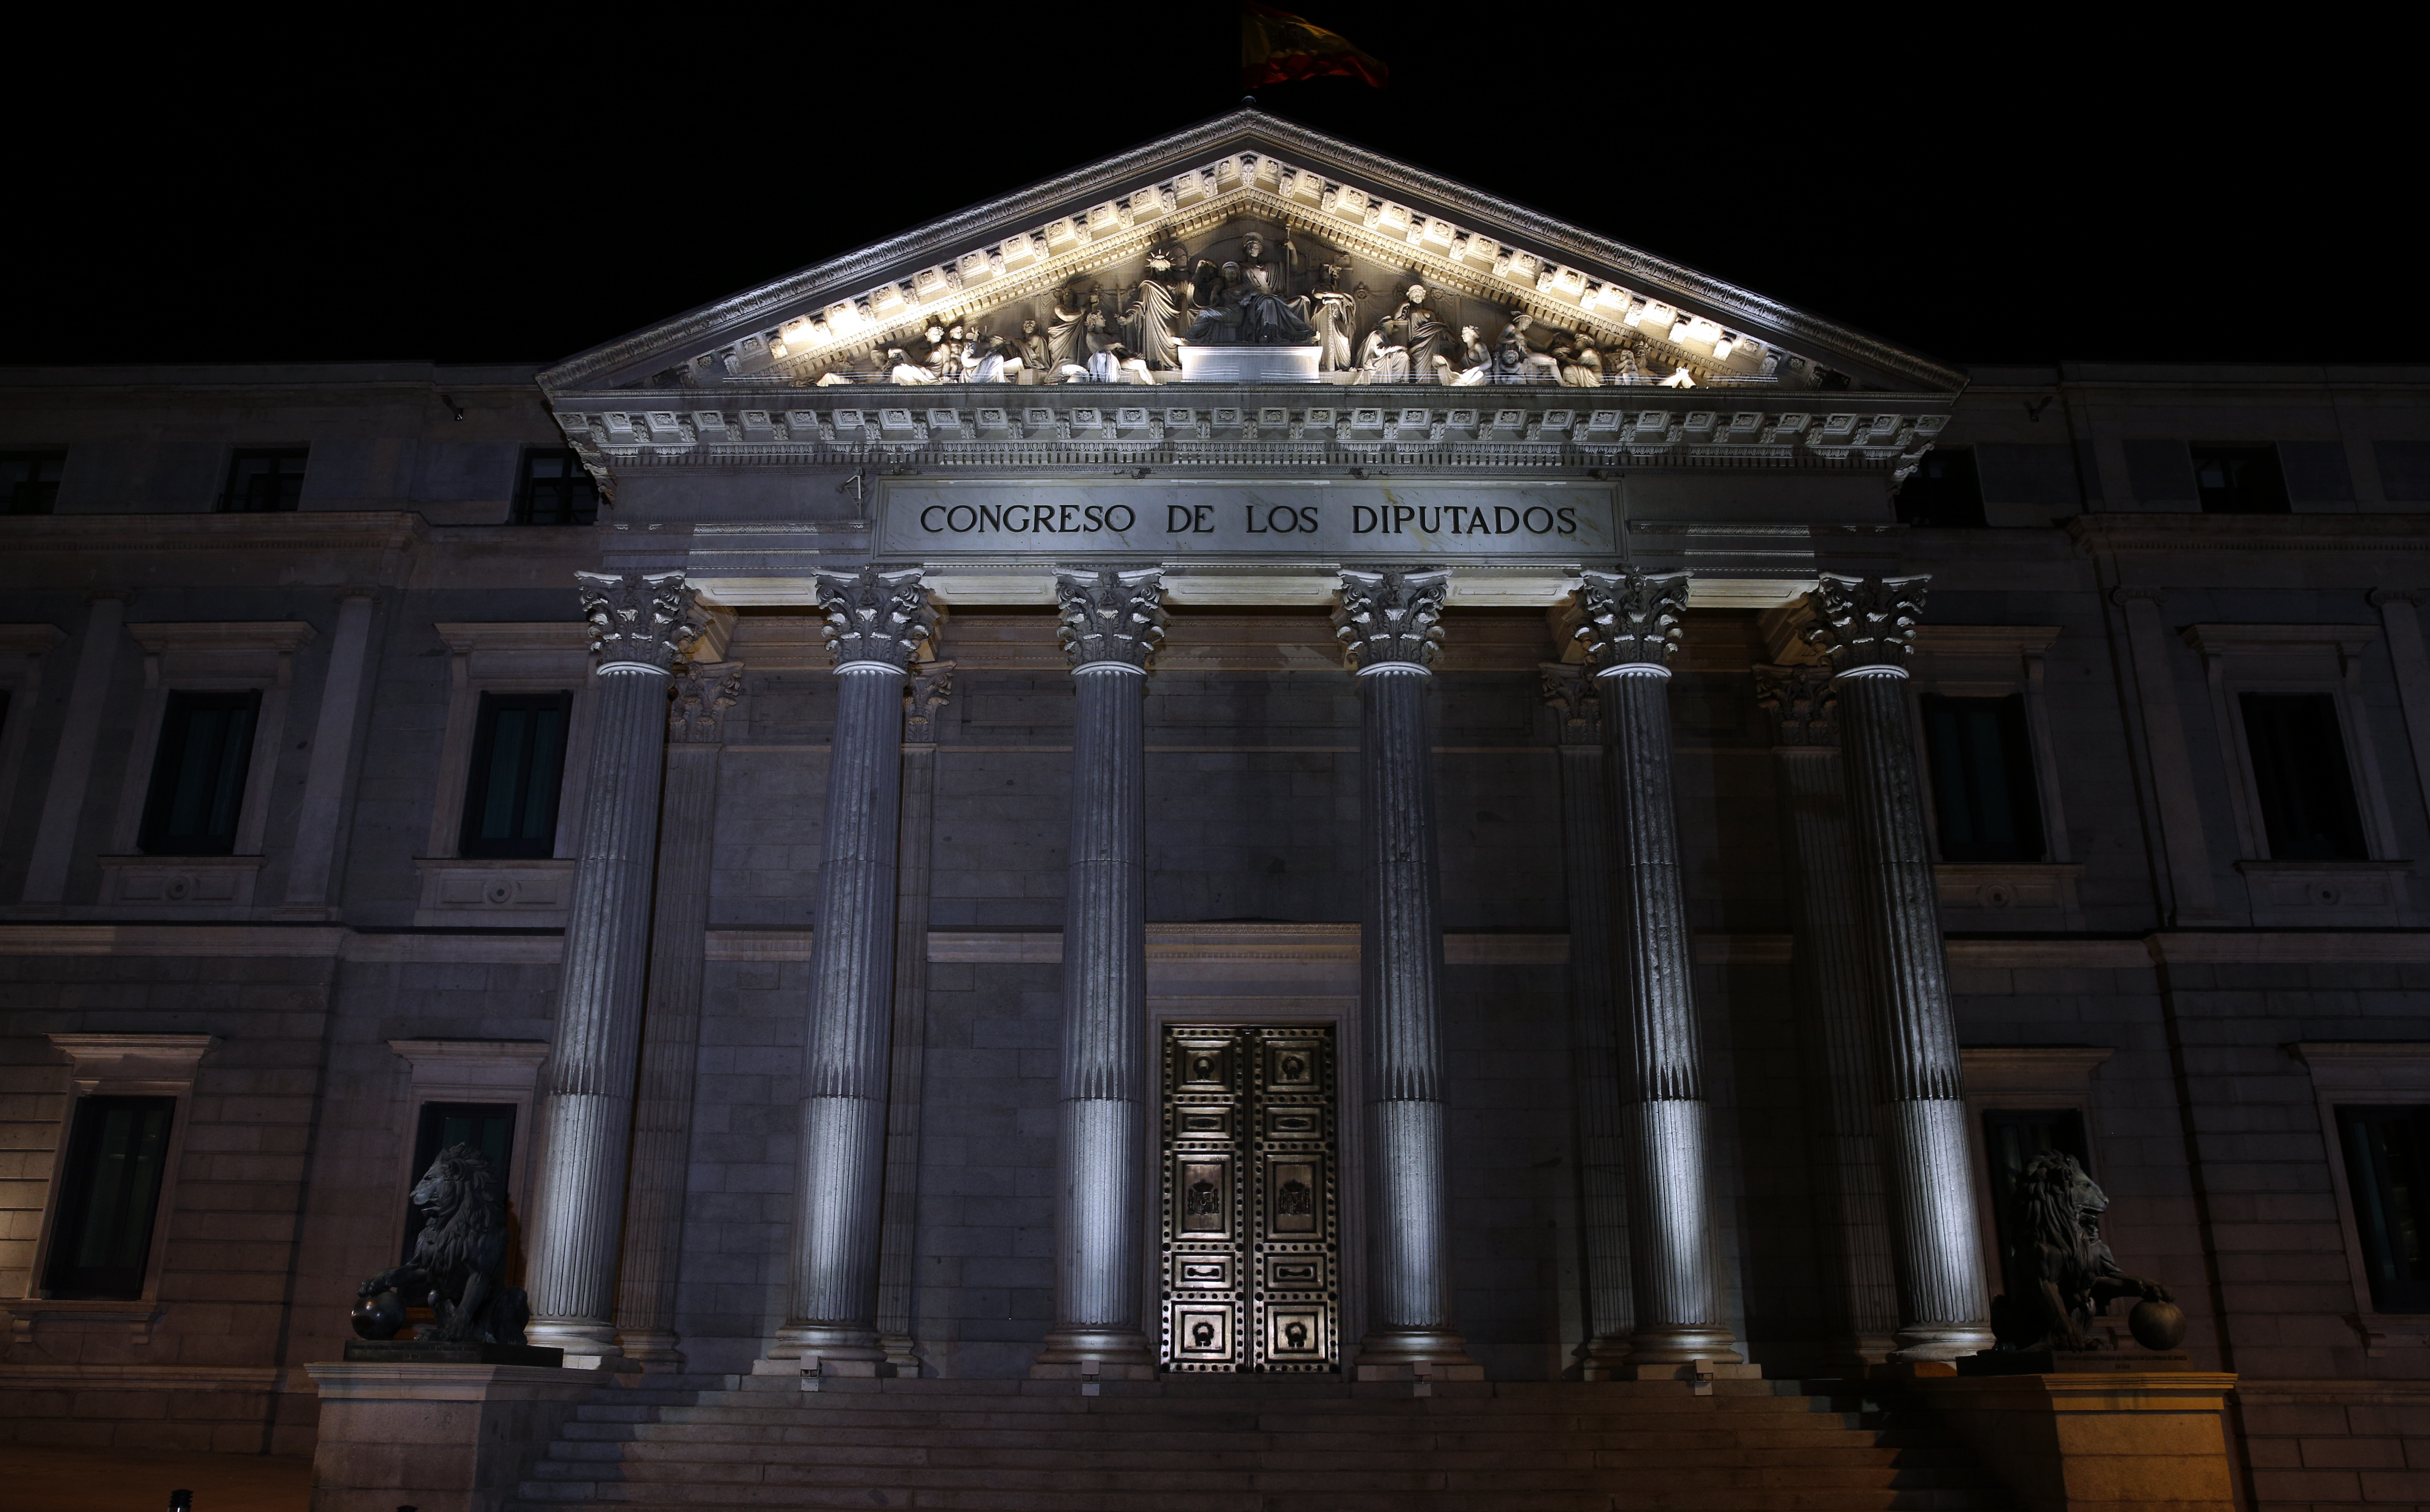 The Spanish Parliament building is seen at night in central Madrid